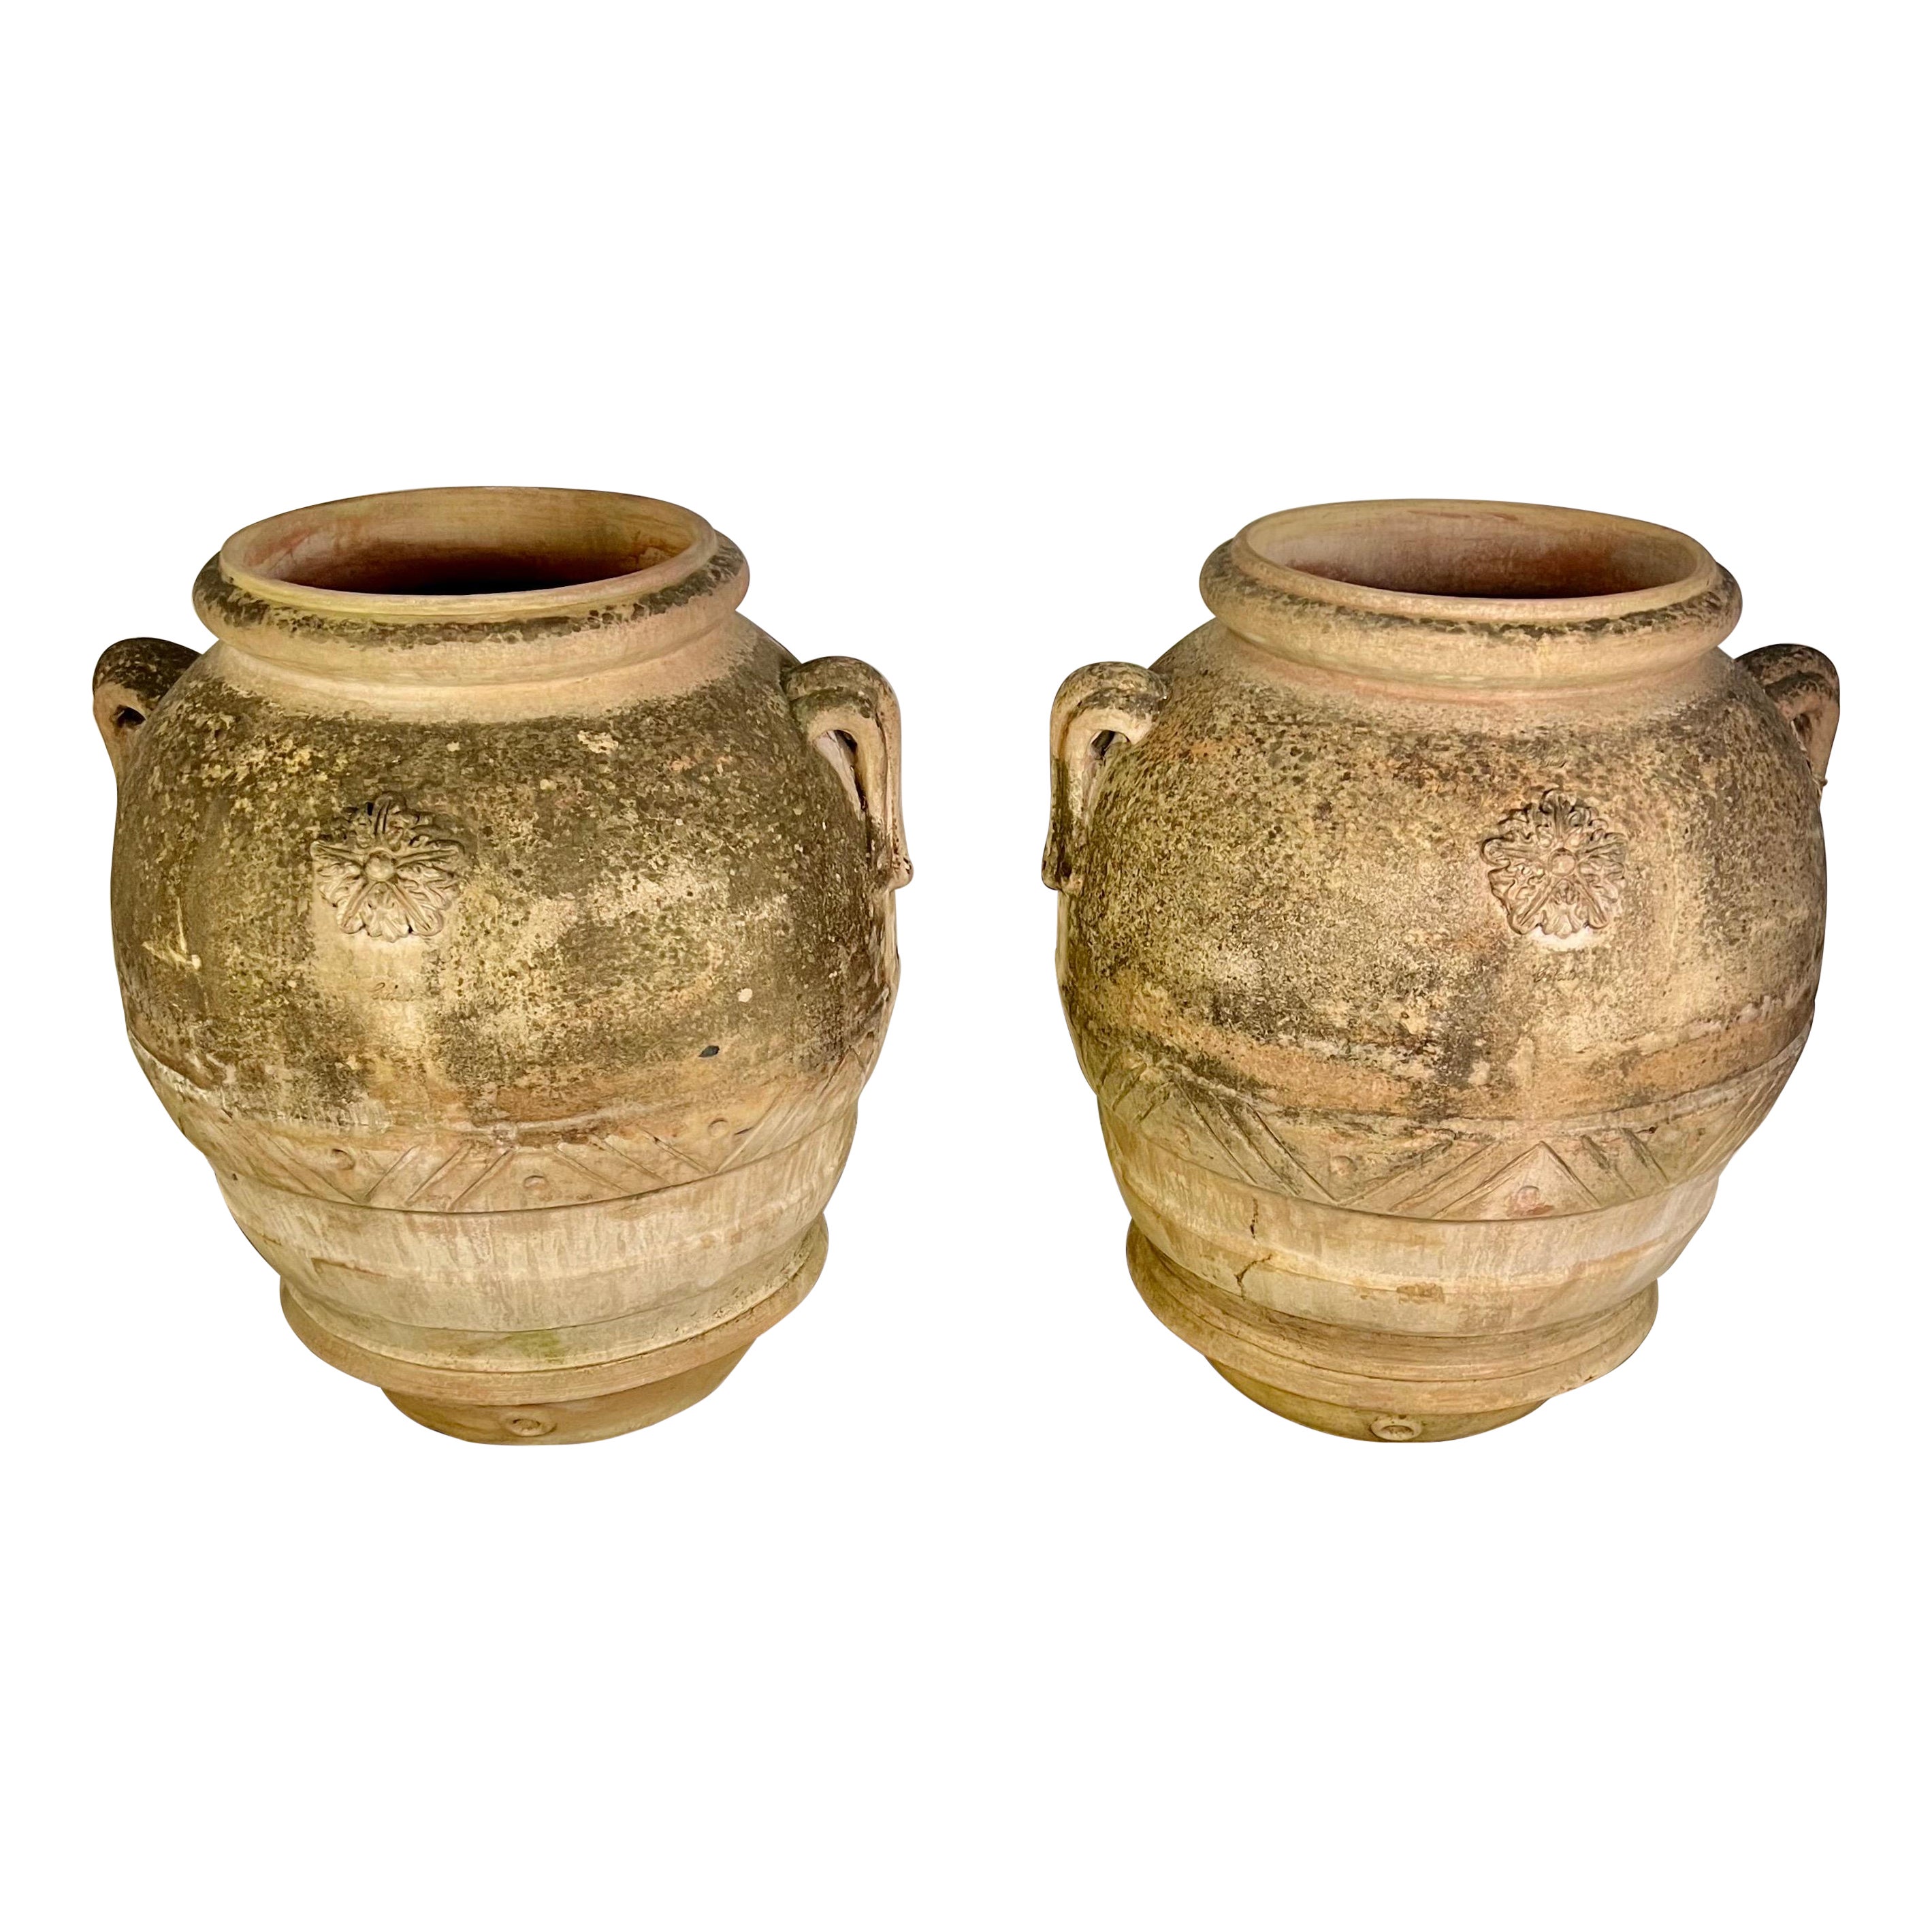 Monumental Pair of Italian Terracotta Planters Signed "Galestro" For Sale